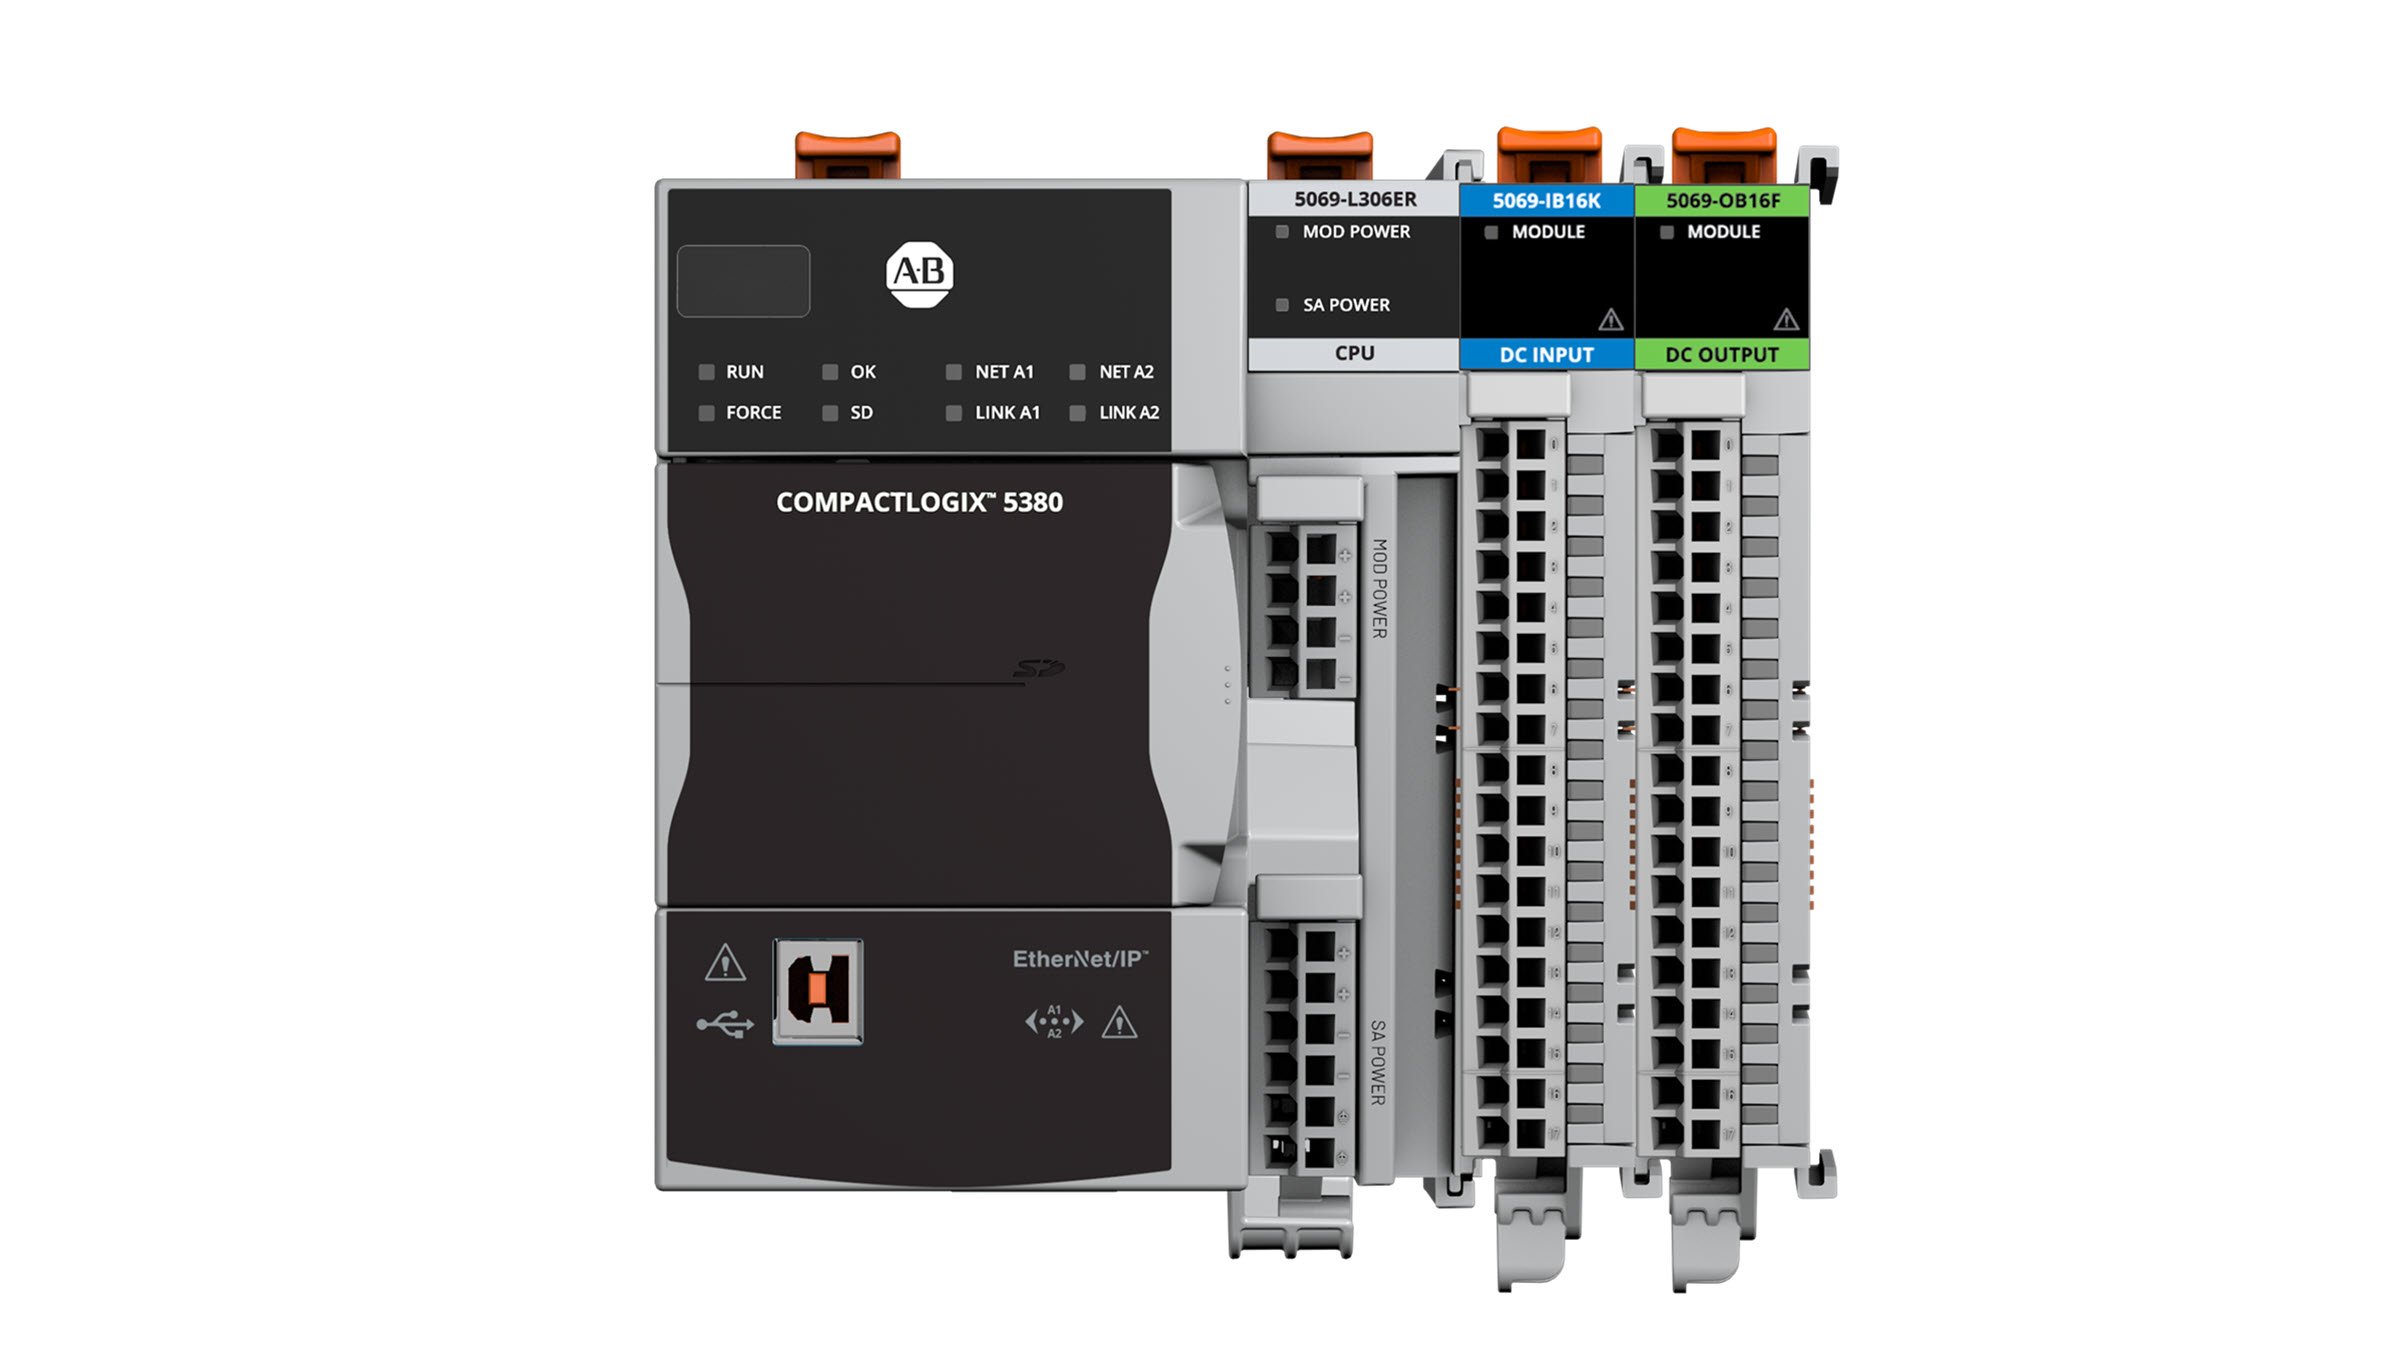 Front-facing view of Allen-Bradley CompactLogix 5380 controller and Compact 5000 I/O modules. The catalogs shown are 5069-L306ER, 5069-IB16K and 5069-OB16F